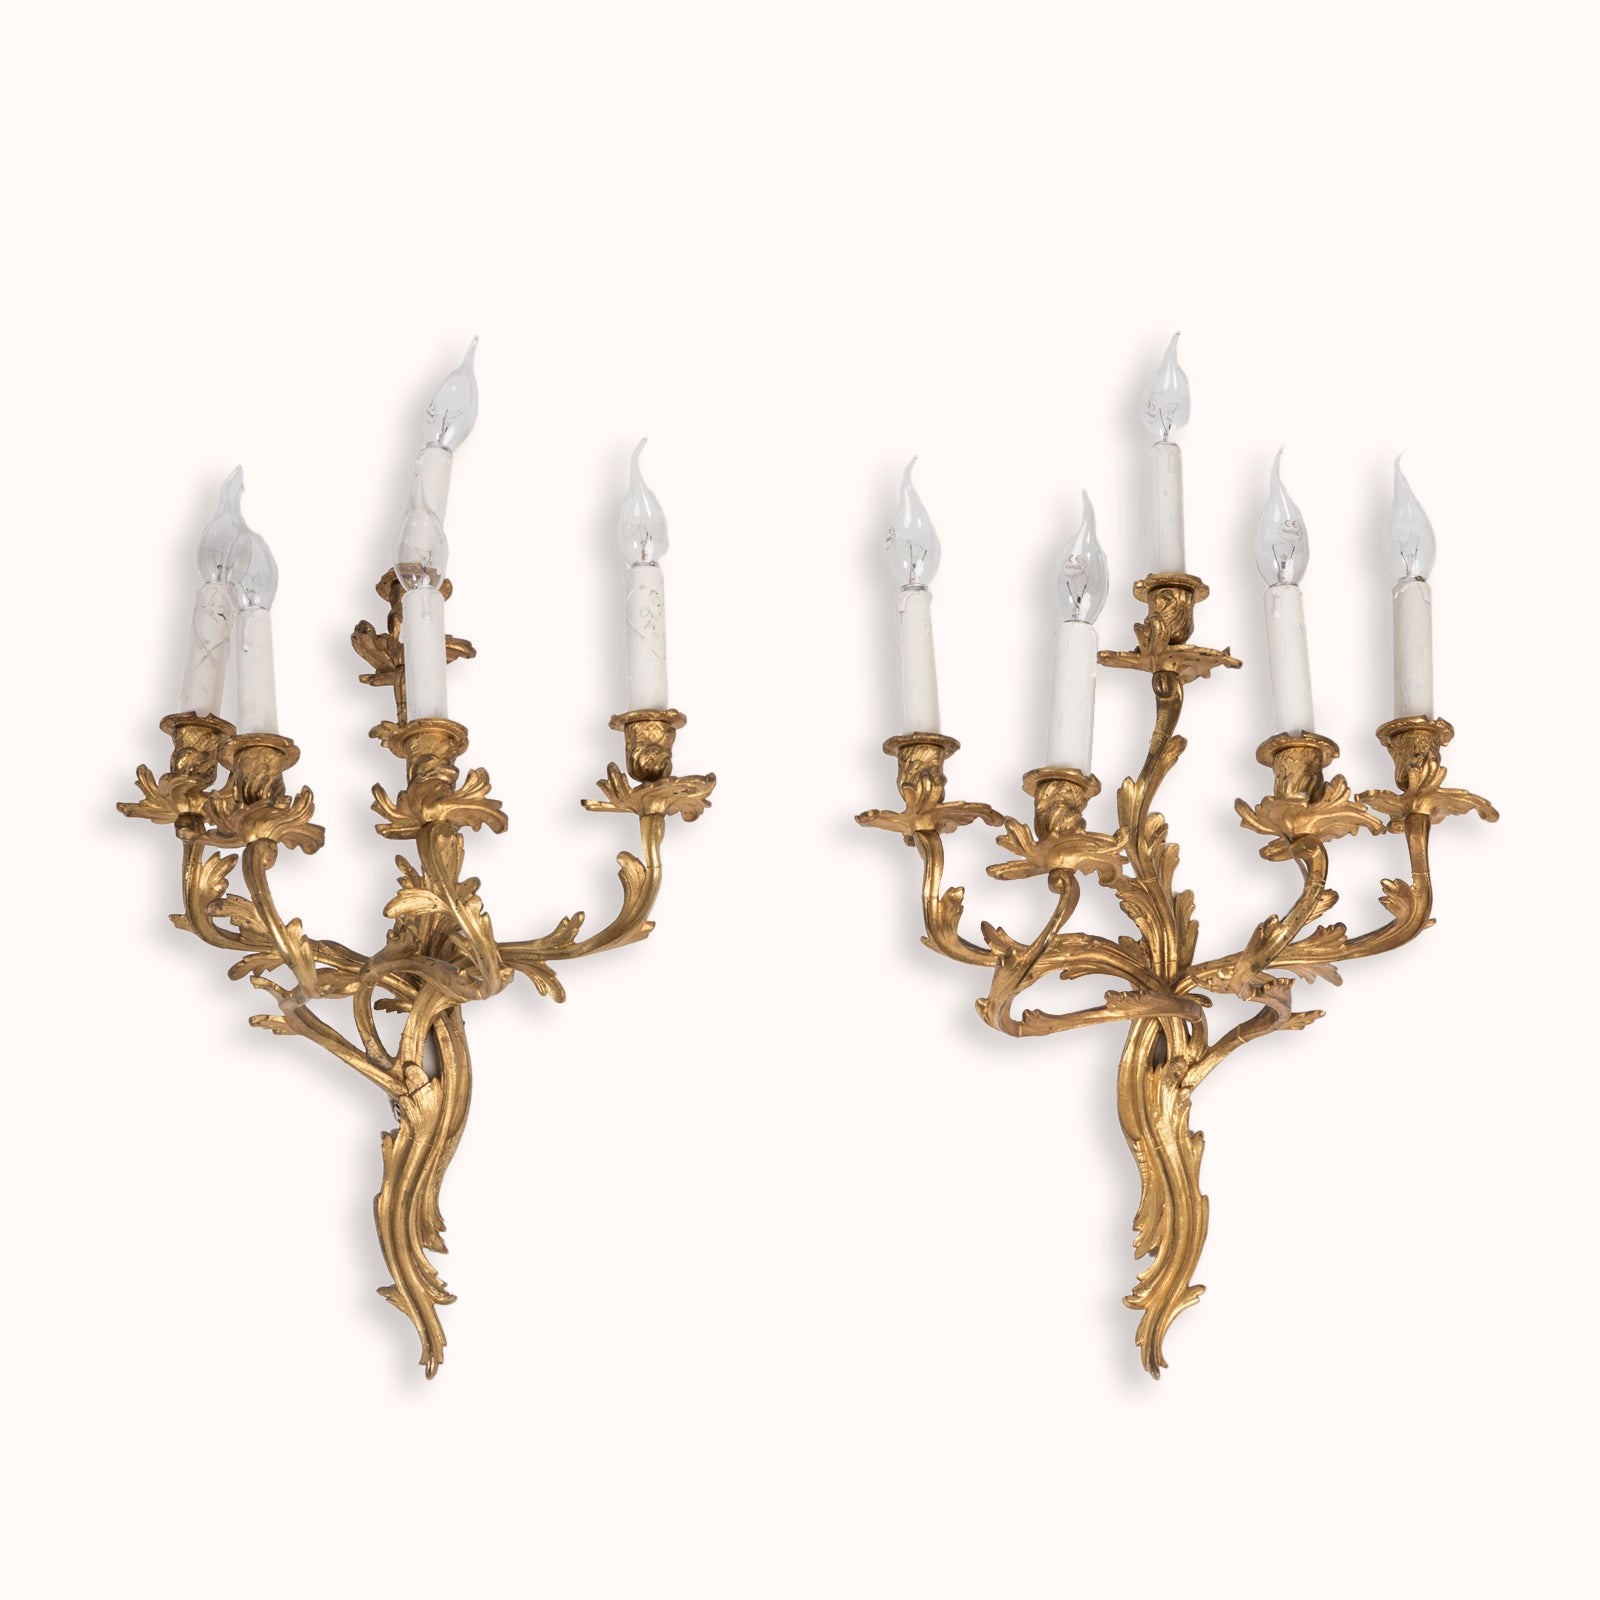 Set of 4 monumental 19th Century French Rococo Sconces